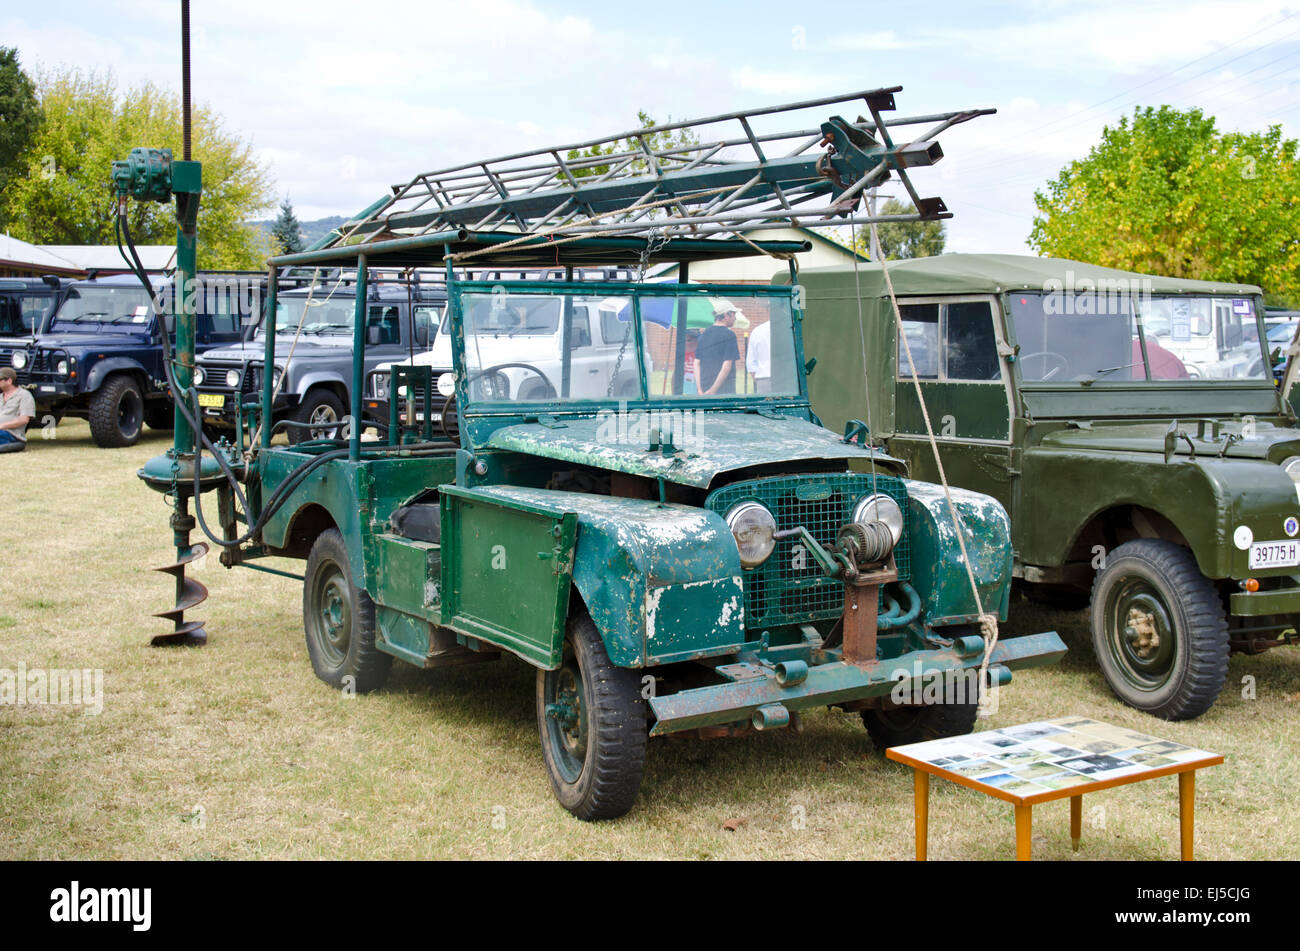 An old Land Rover fitted with assorted farming equipment and body alterations Stock Photo